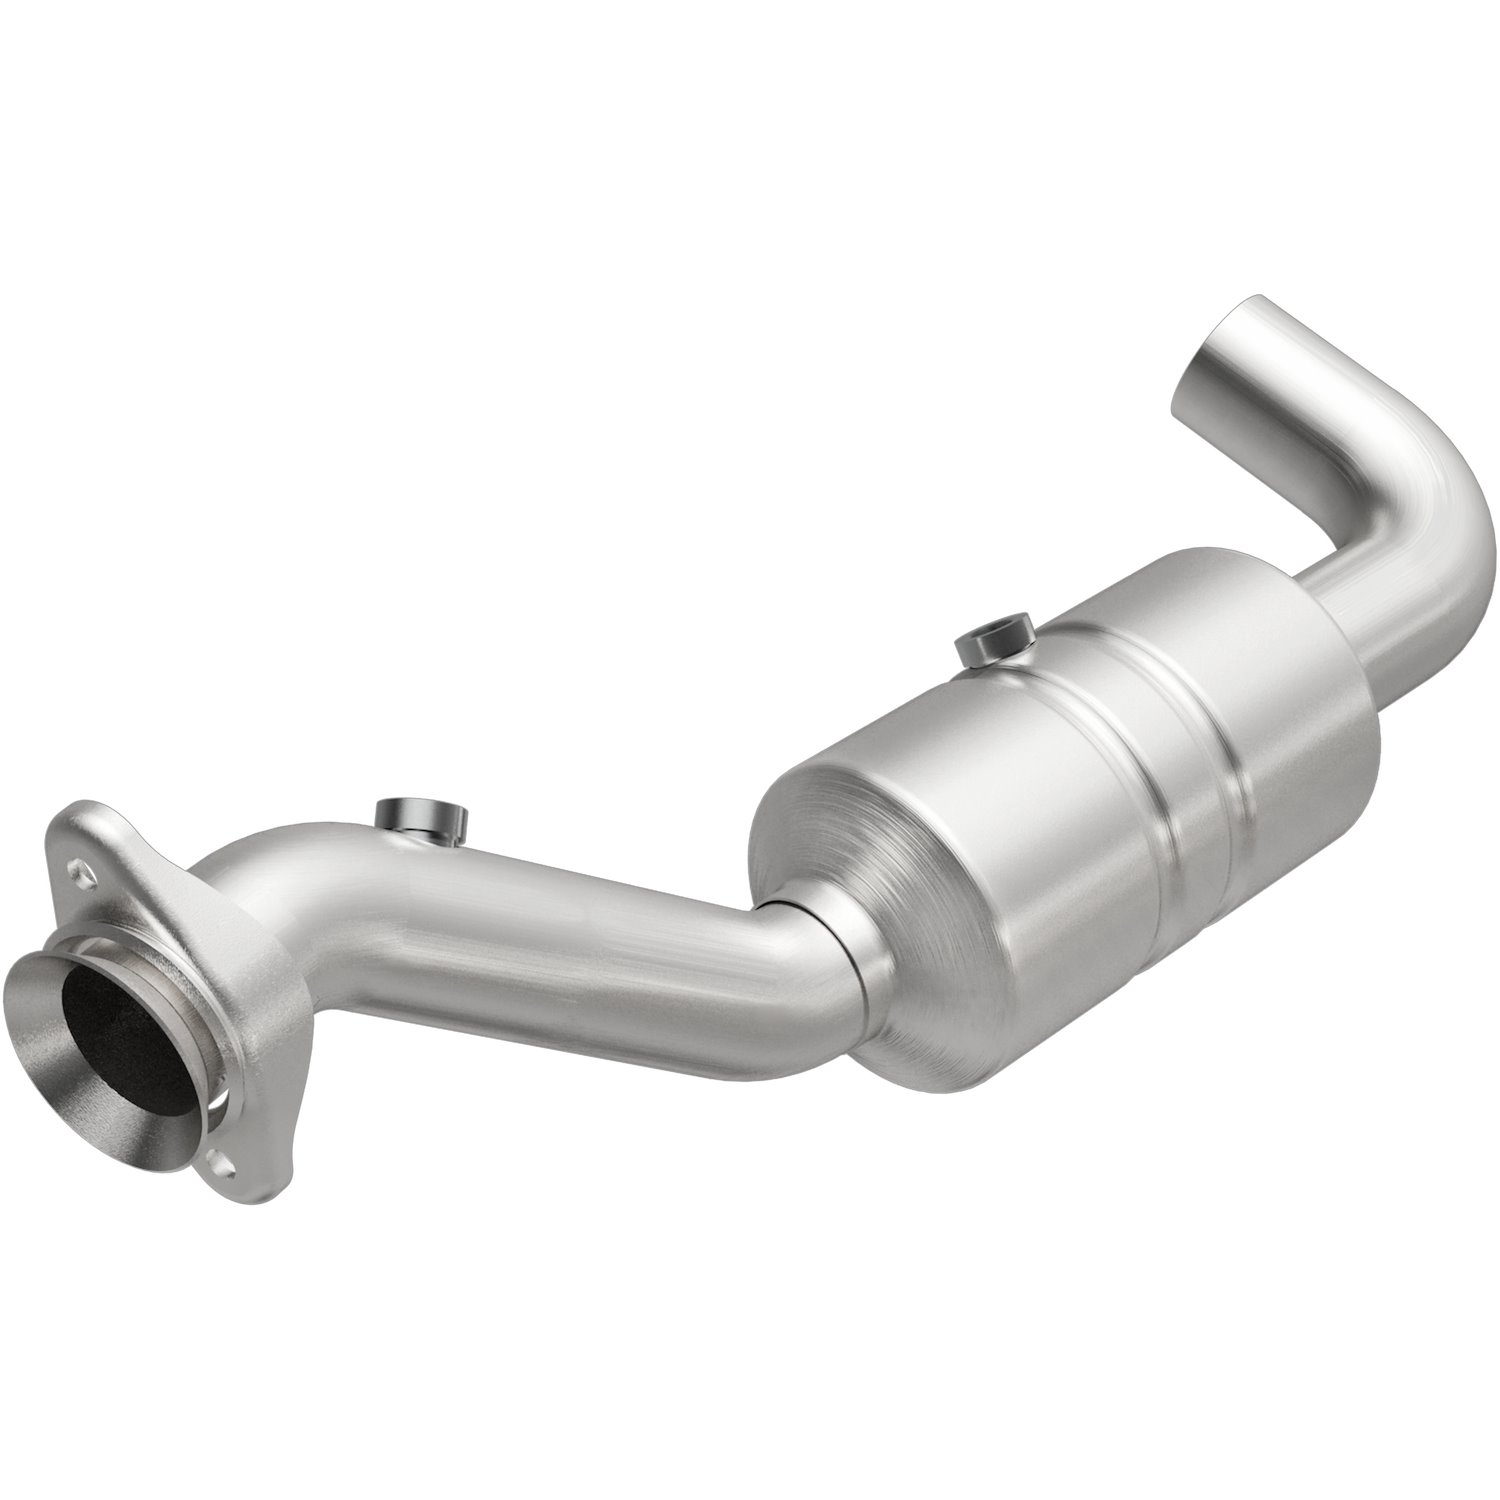 2017-2018 Ford F-150 OEM Grade Federal / EPA Compliant Direct-Fit Catalytic Converter